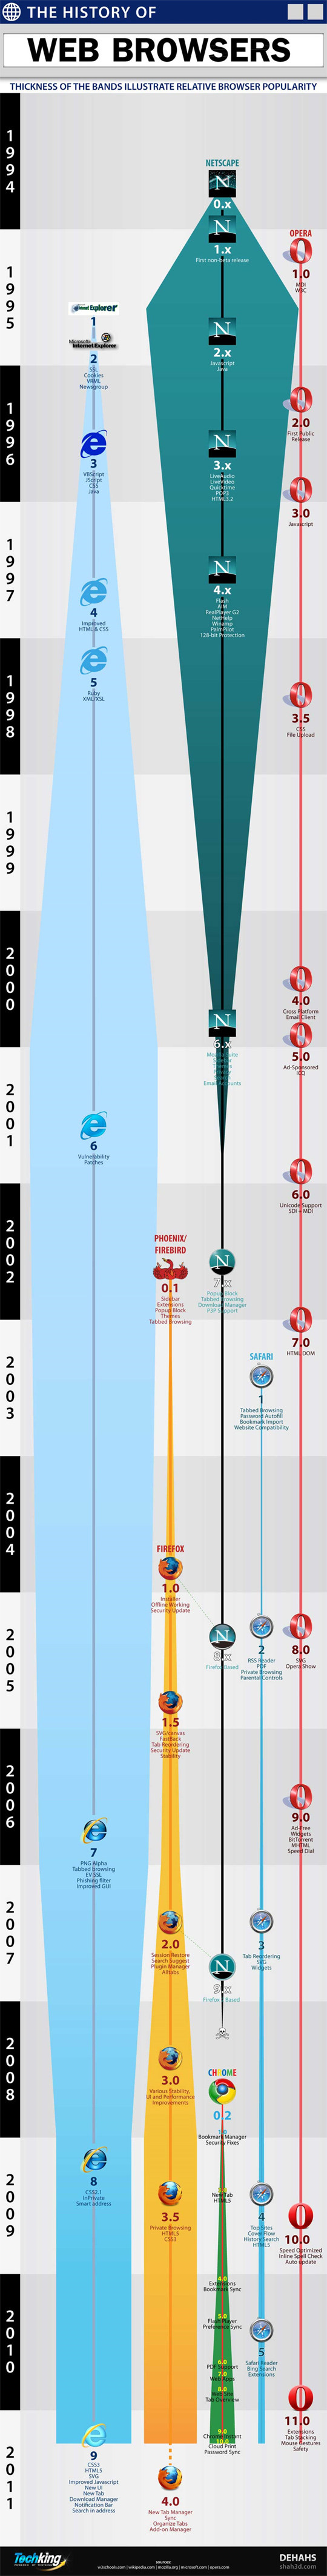 the history of web browsers